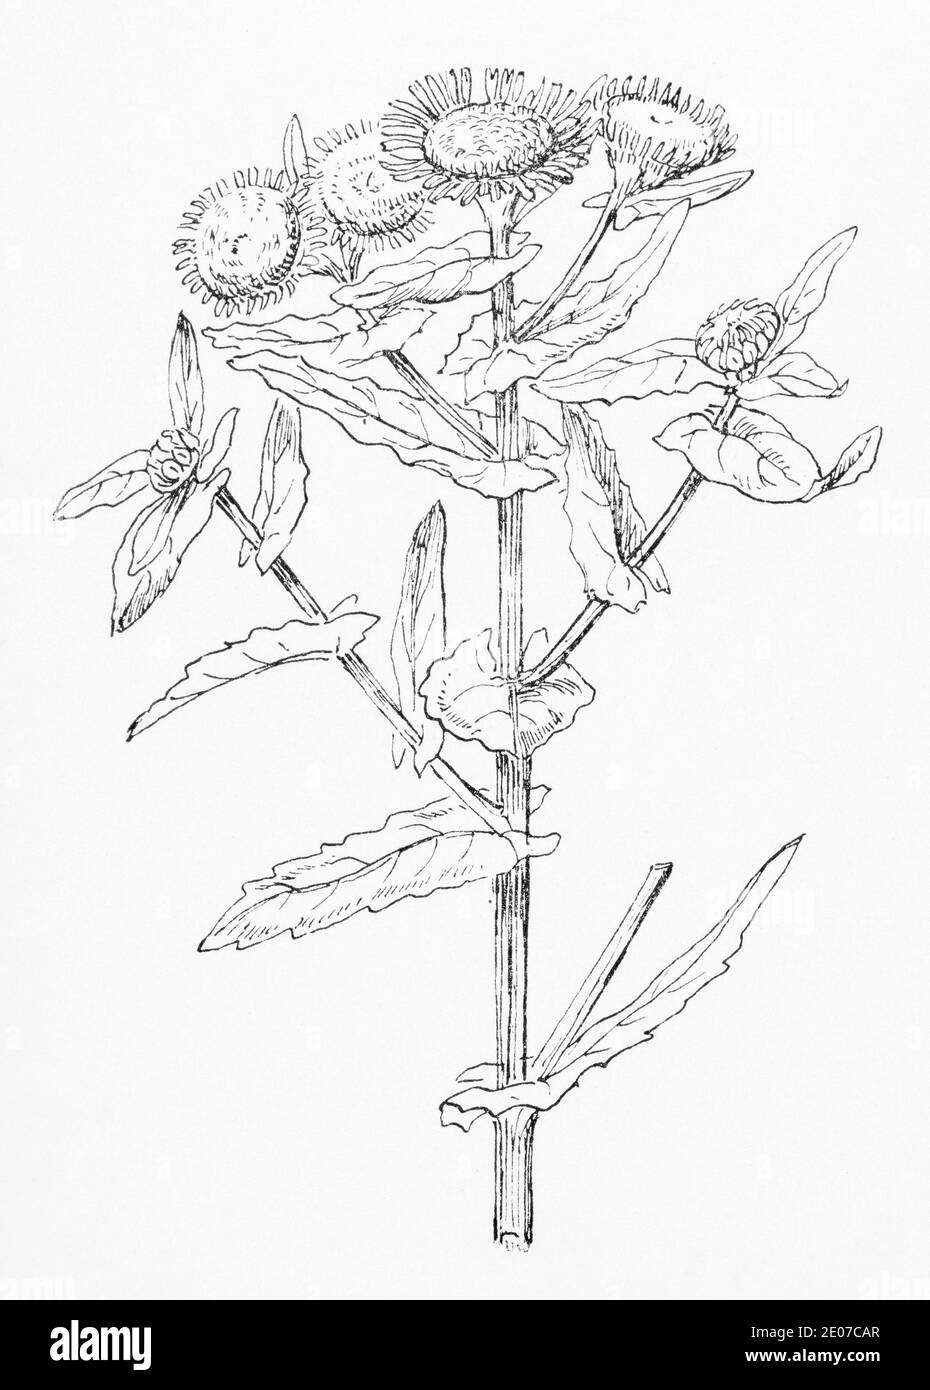 Old botanical illustration engraving of Fleabane / Pulicaria dysenterica, Inula dysenterica. Traditional medicinal herbal plant. See Notes Stock Photo